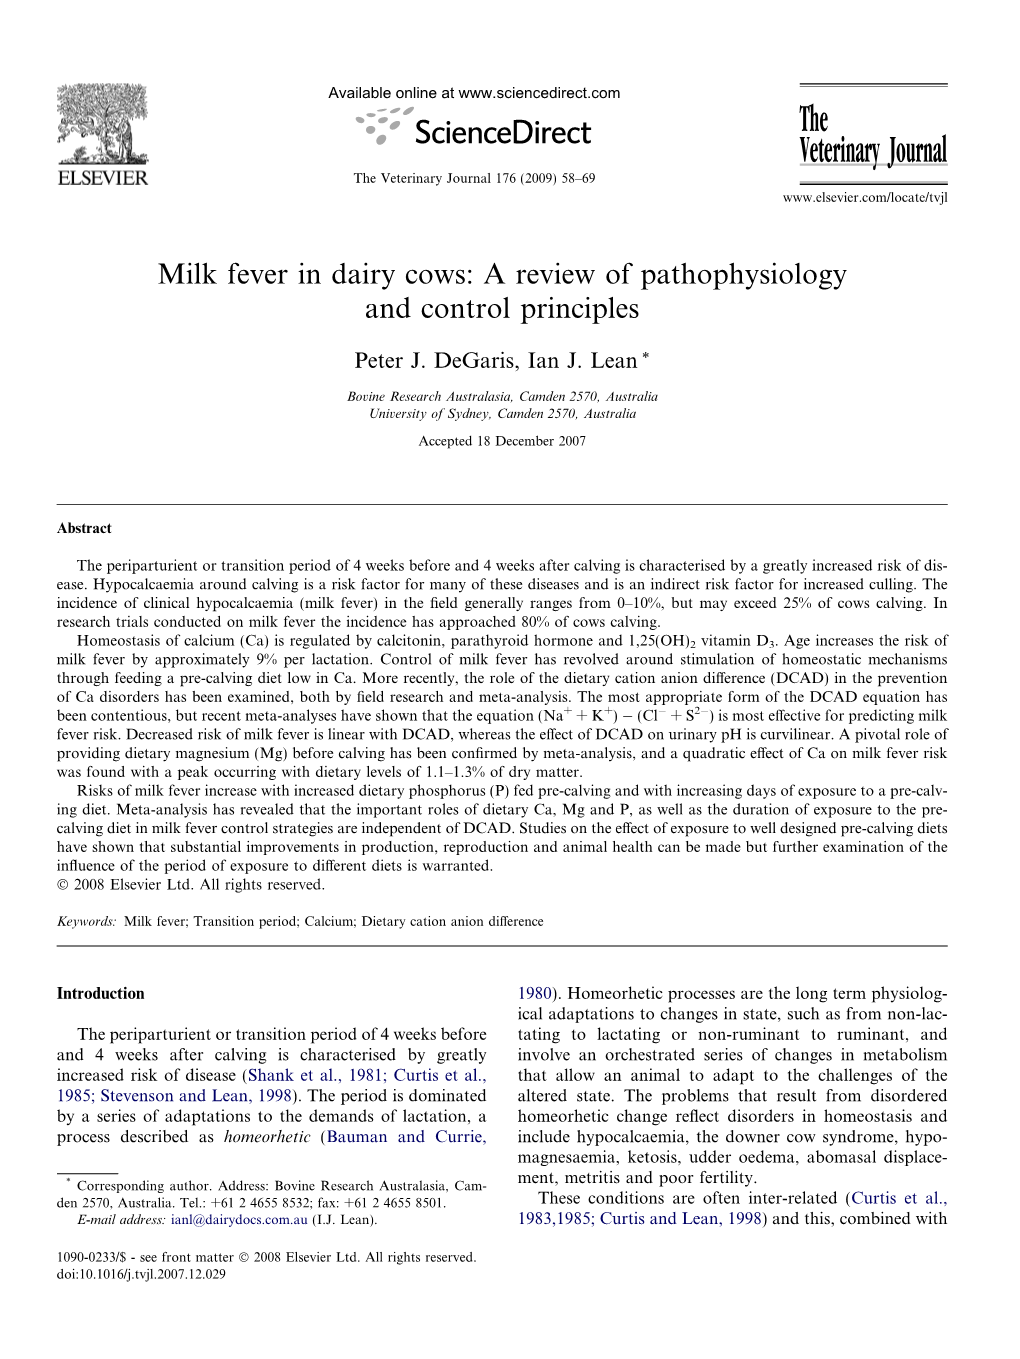 Milk Fever in Dairy Cows: a Review of Pathophysiology and Control Principles